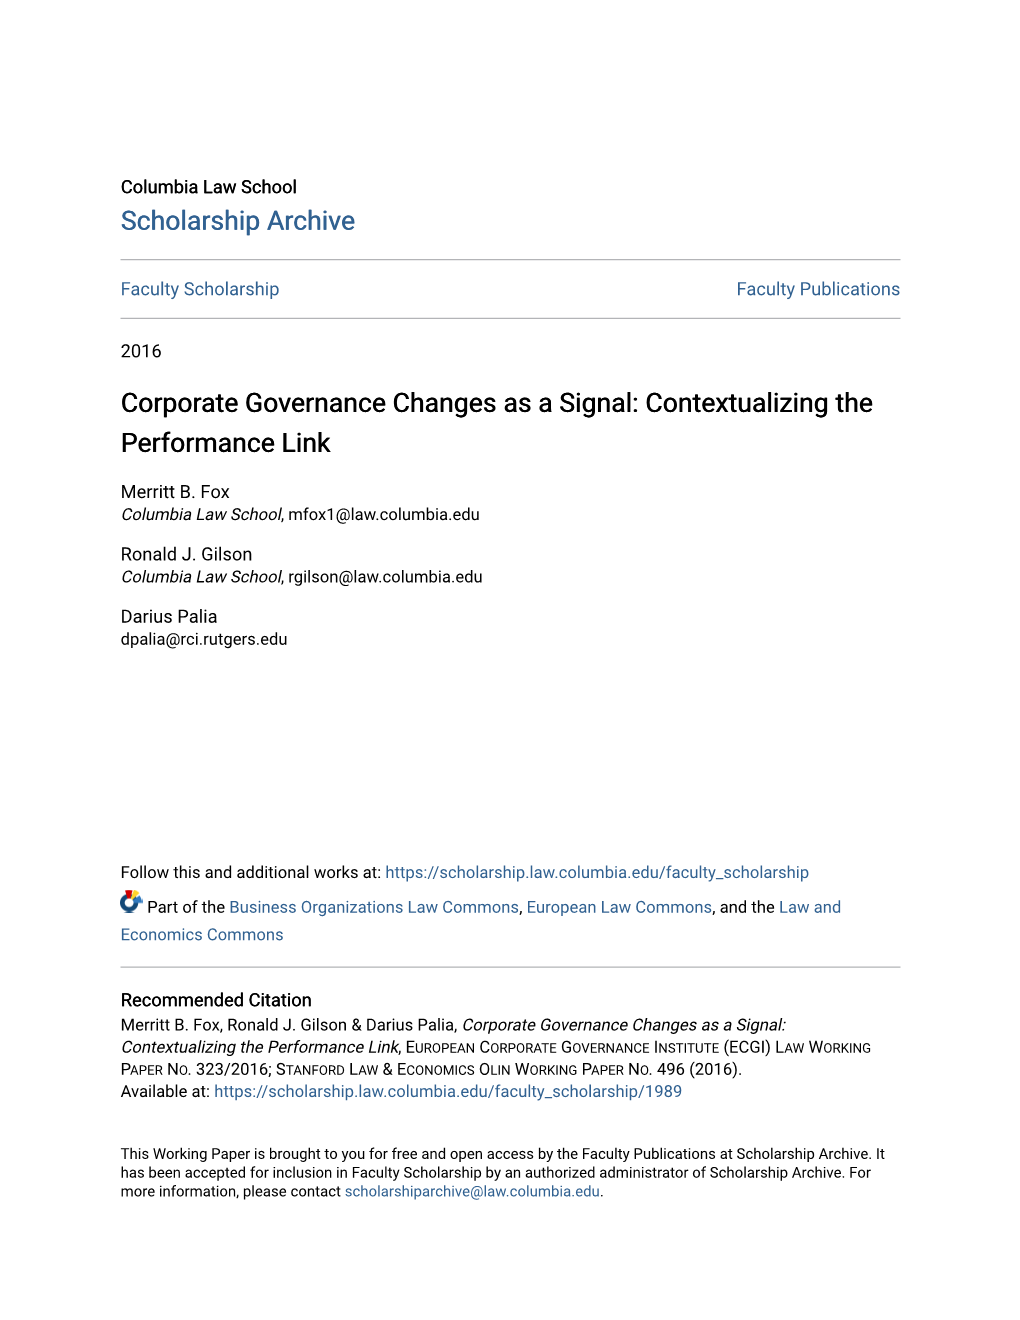 Corporate Governance Changes As a Signal: Contextualizing the Performance Link